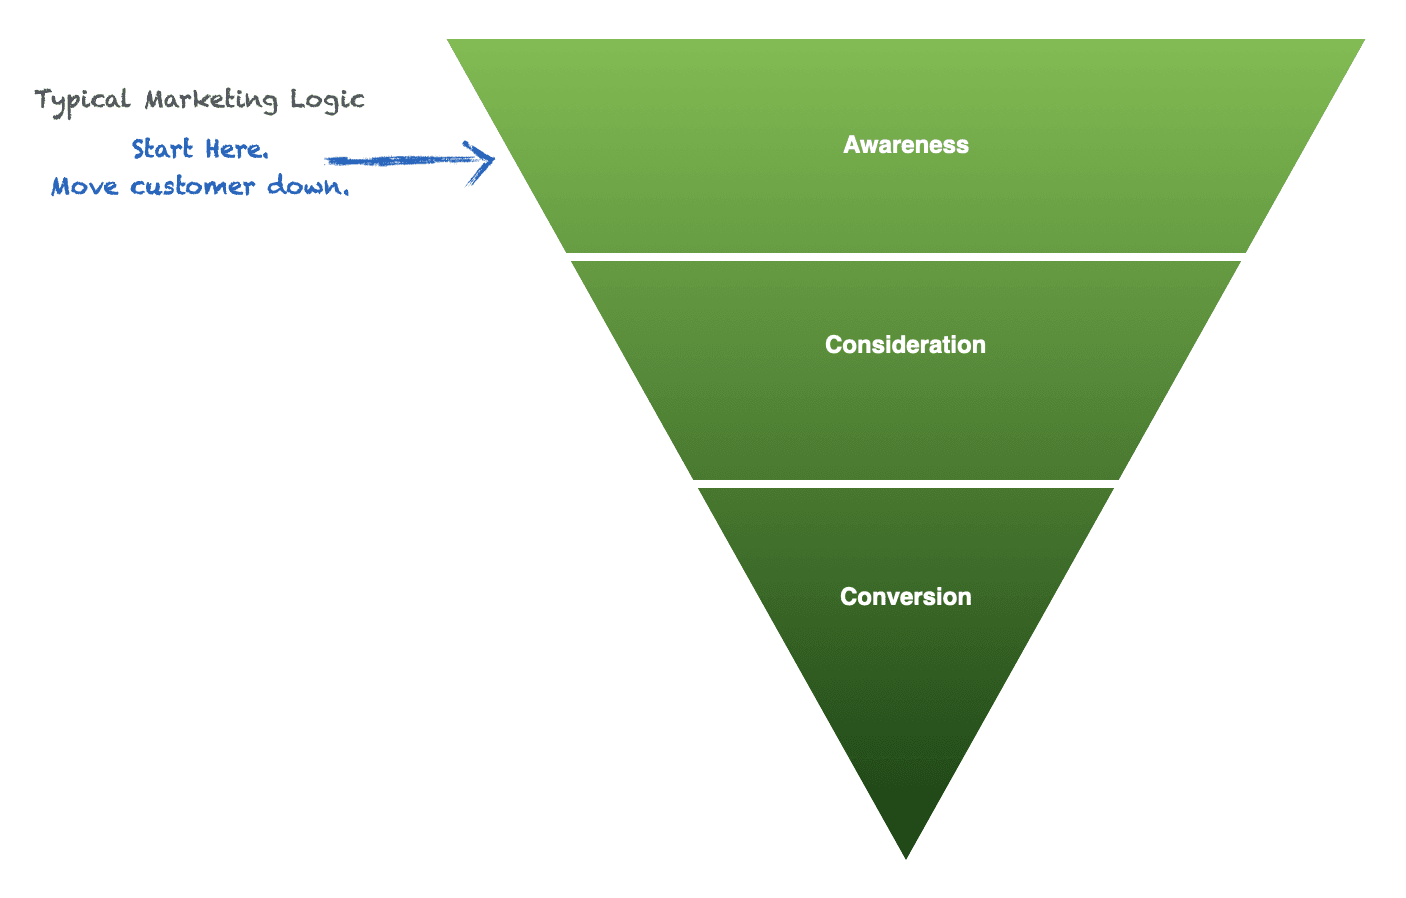 The typical approach to B2C content marketing: Awareness, Consideration, Conversion - Start at the top of the funnel and move customer down.